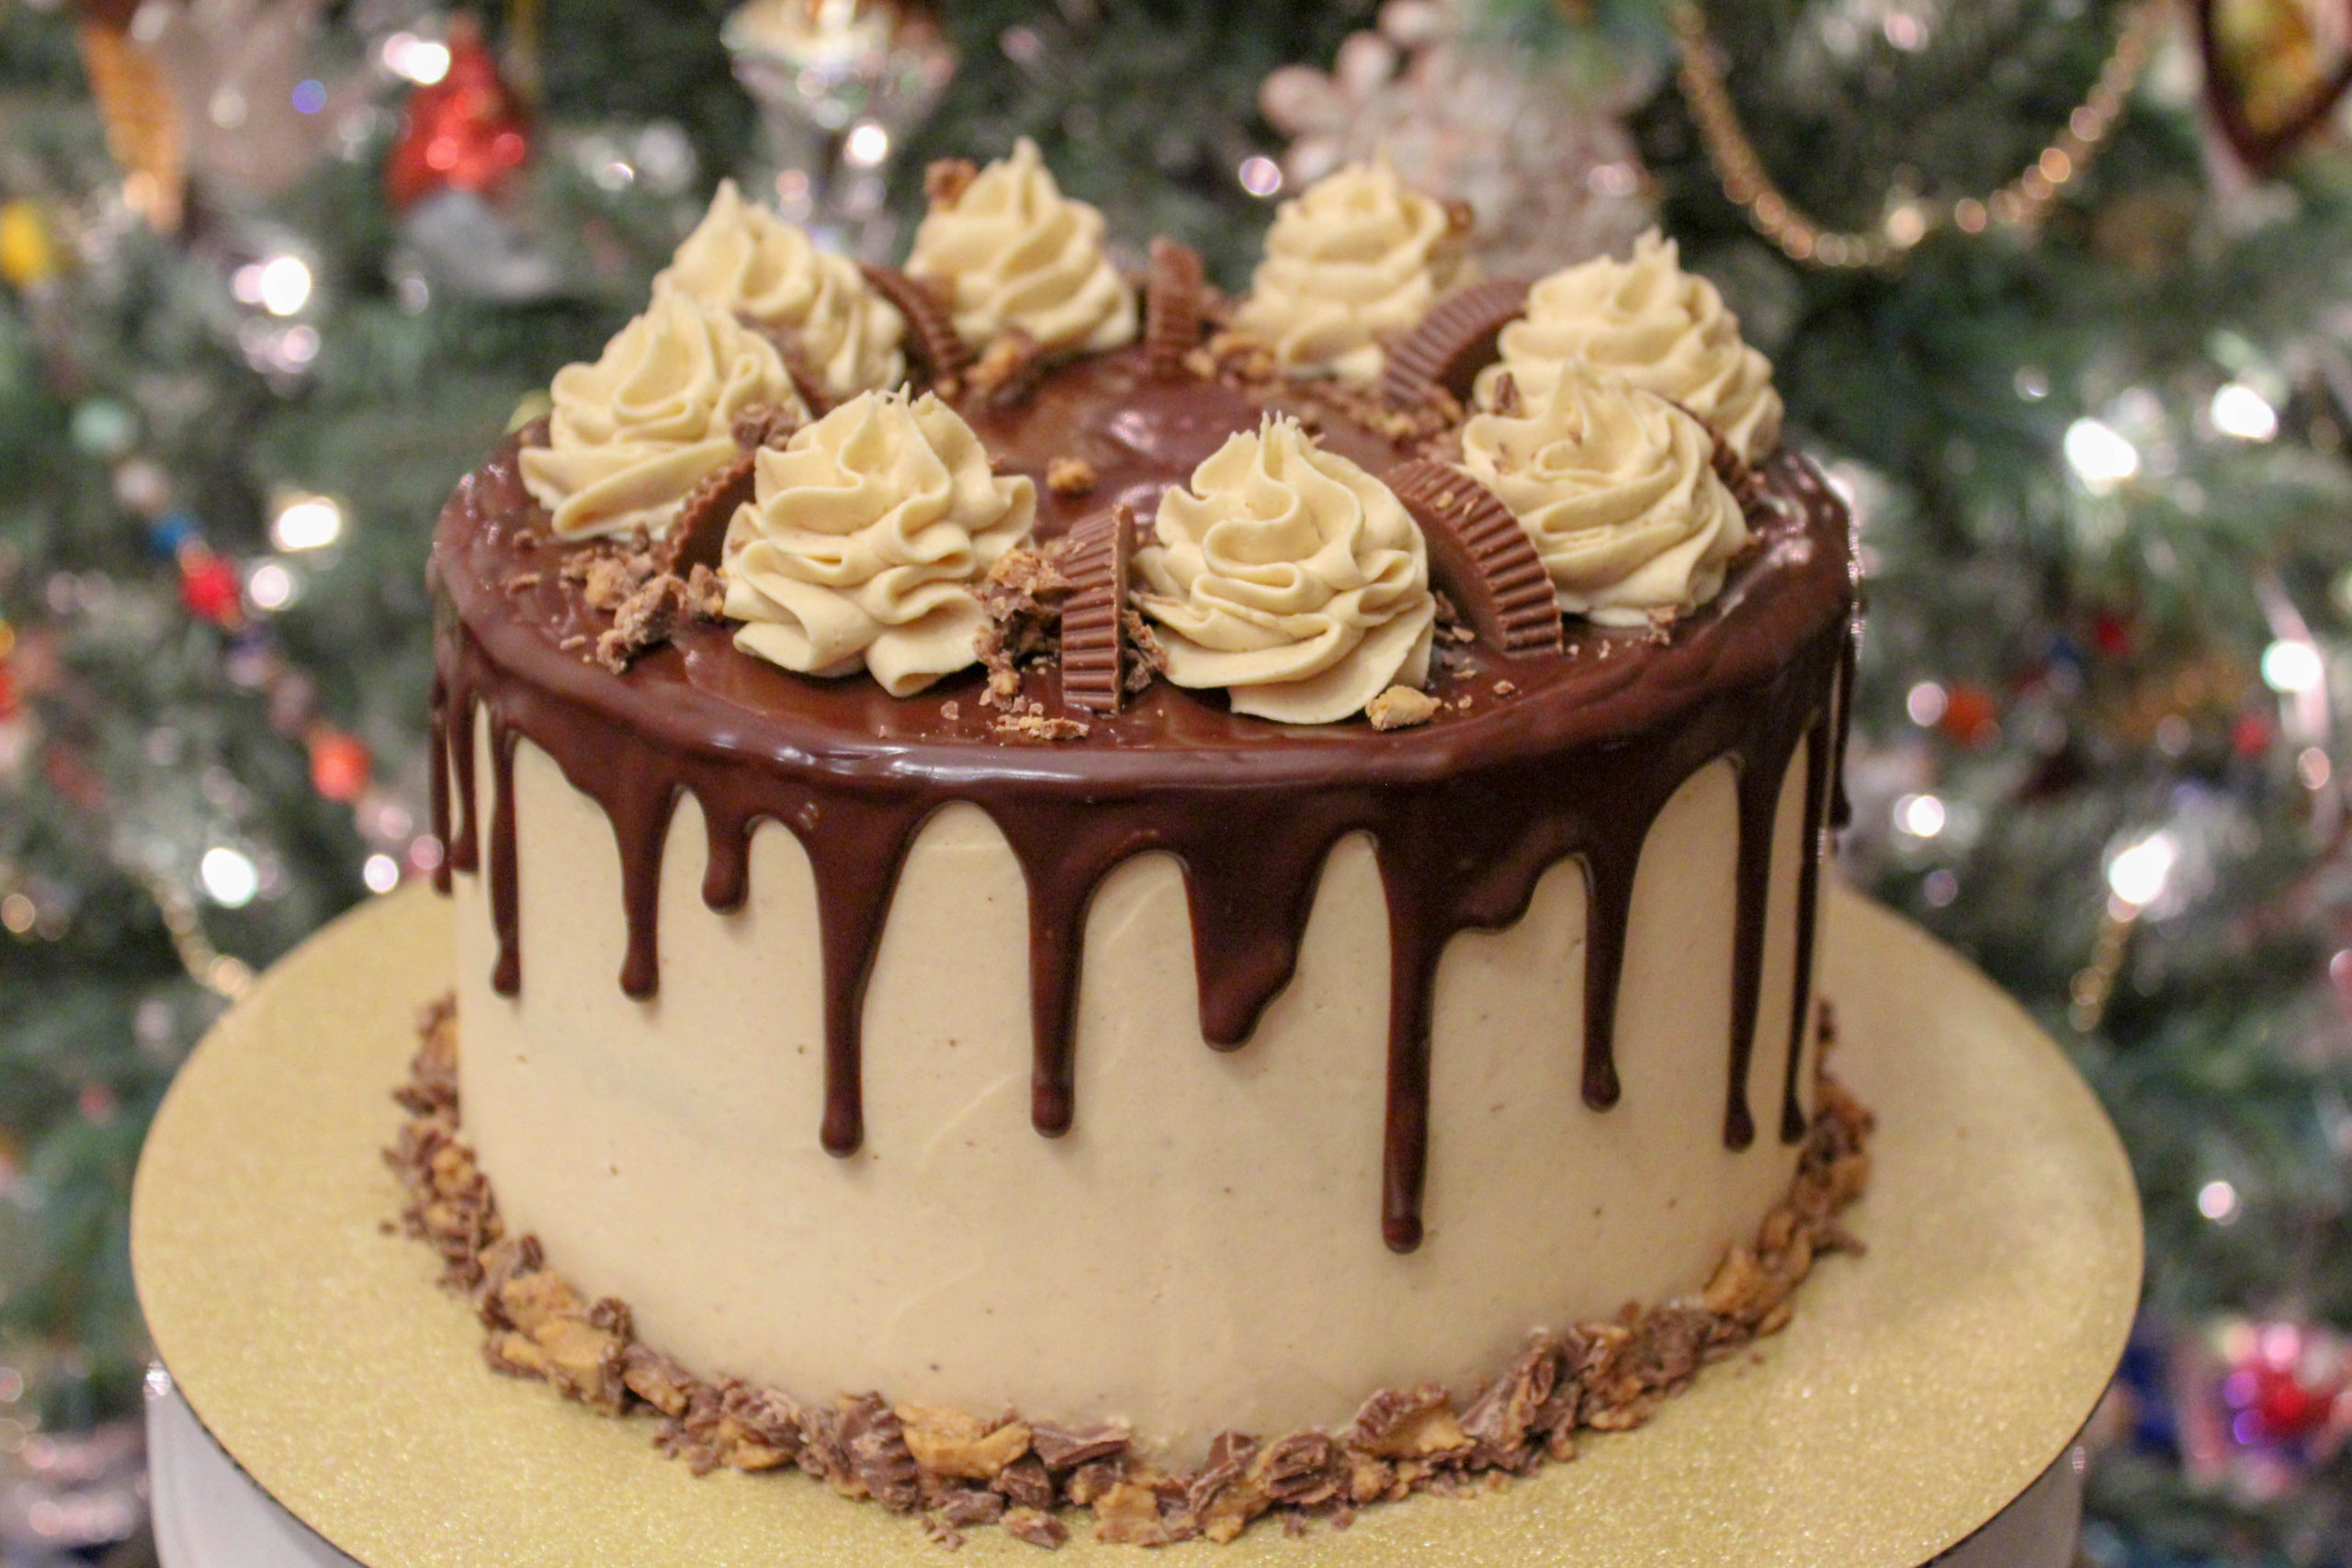 Chocolate Peanut Butter Cake - Recipes Inspired by Mom